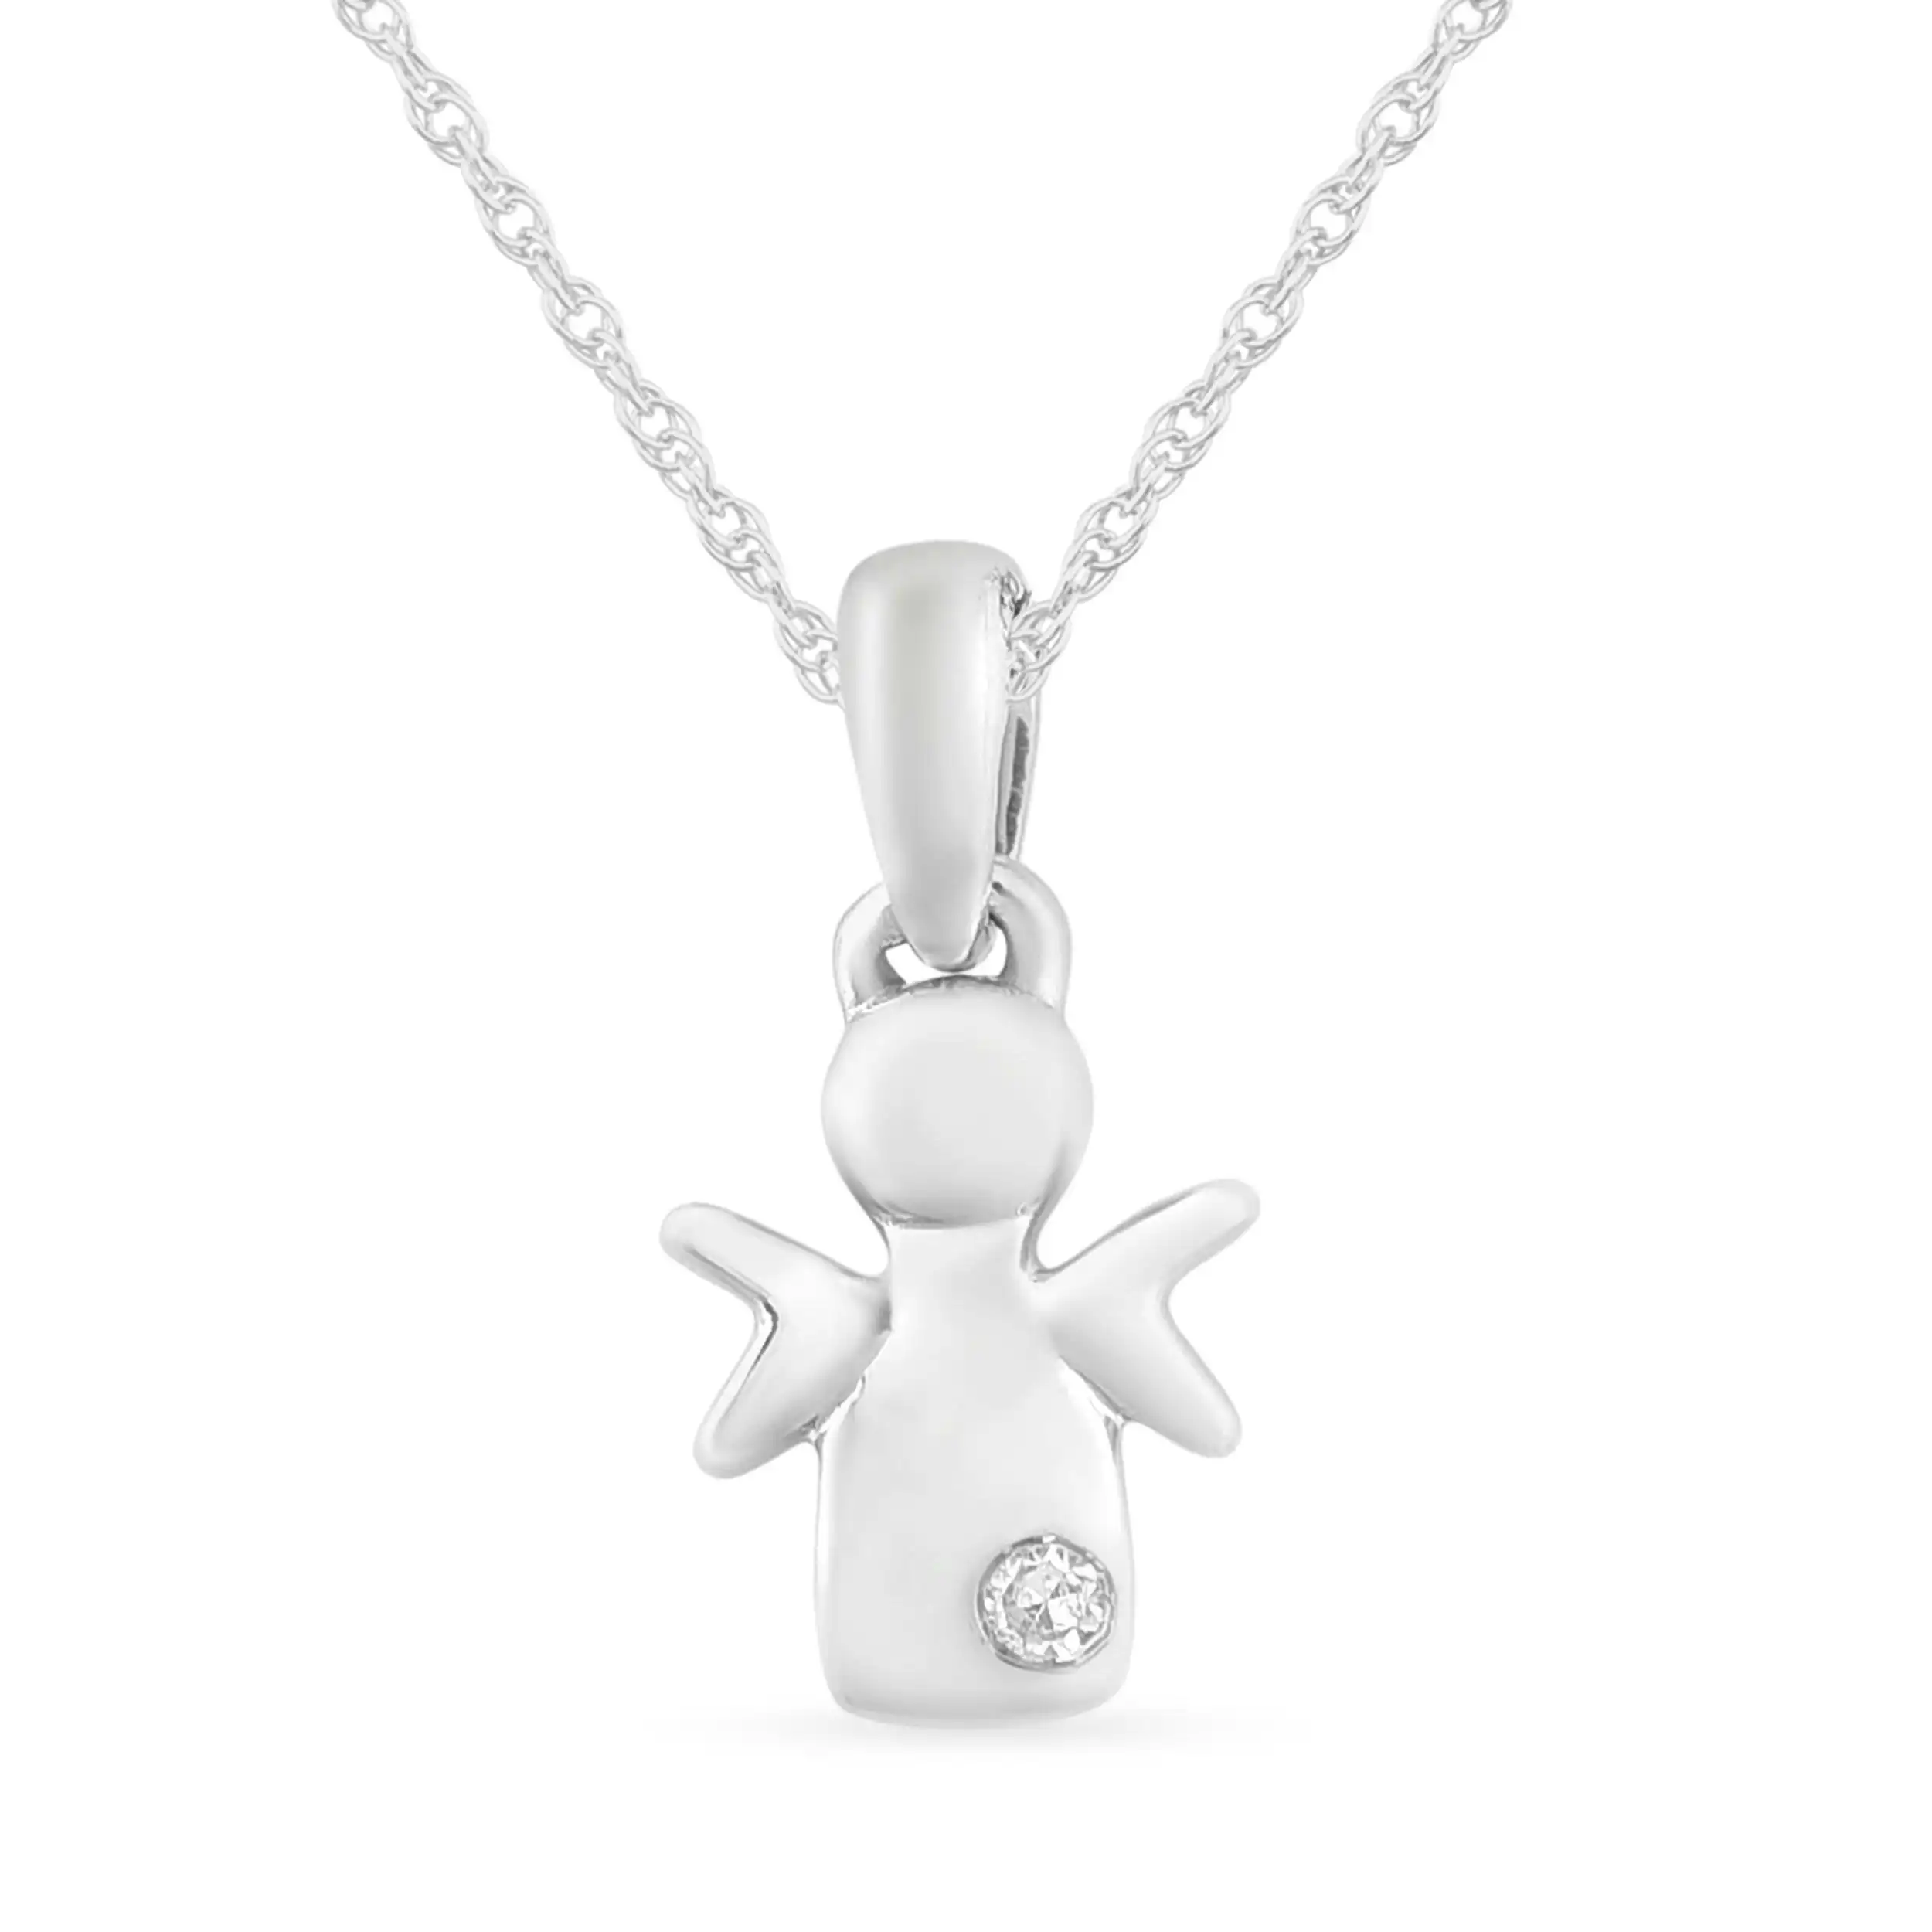 Children's Diamond Angel Necklace in Sterling Silver